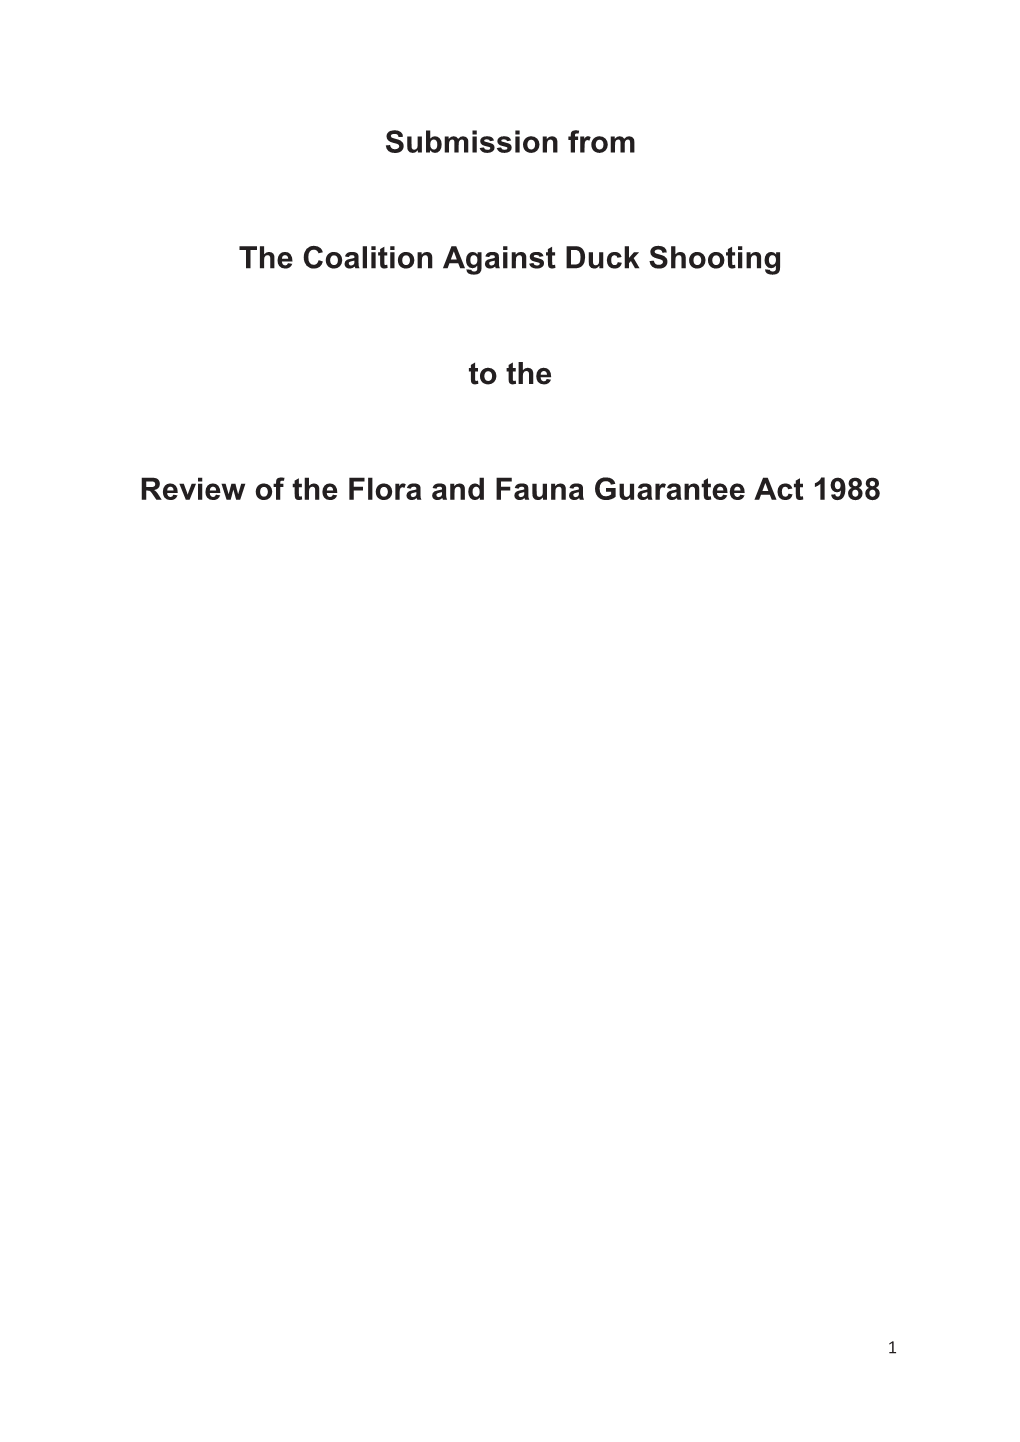 Submission from the Coalition Against Duck Shooting to The